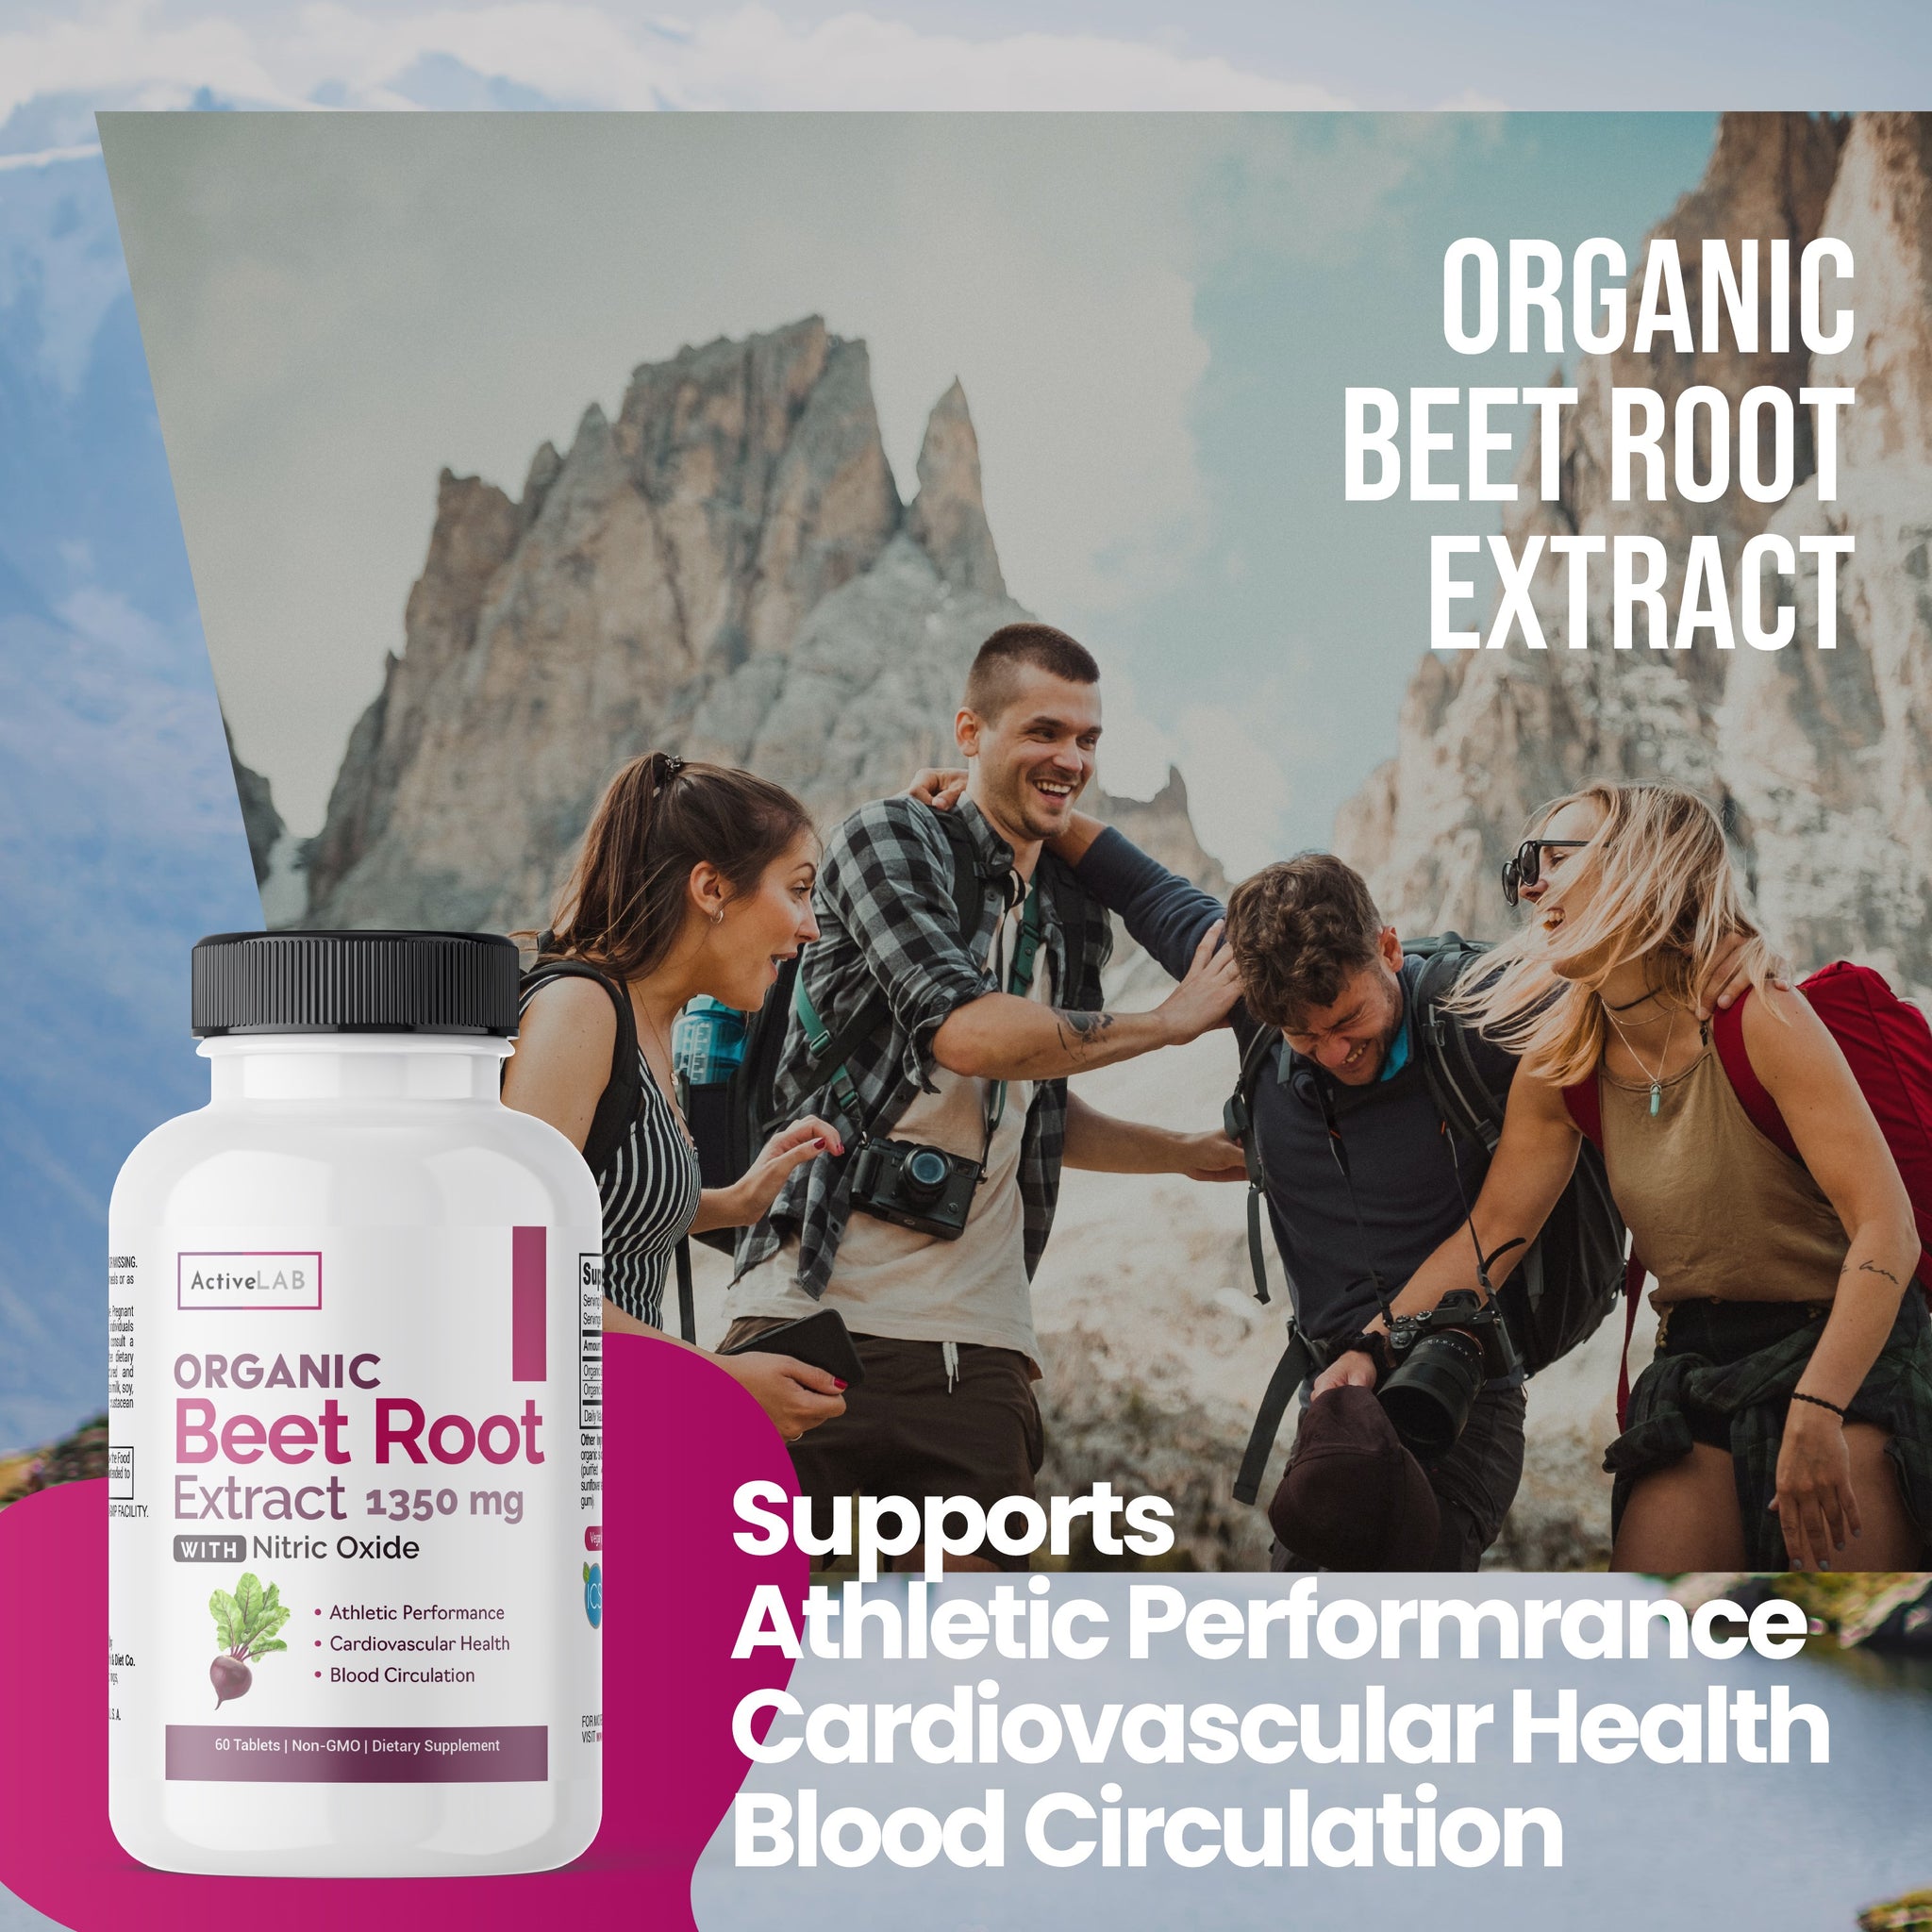 NITRIC OXIDE - ORGANIC BEET TABLETS COMPLEX